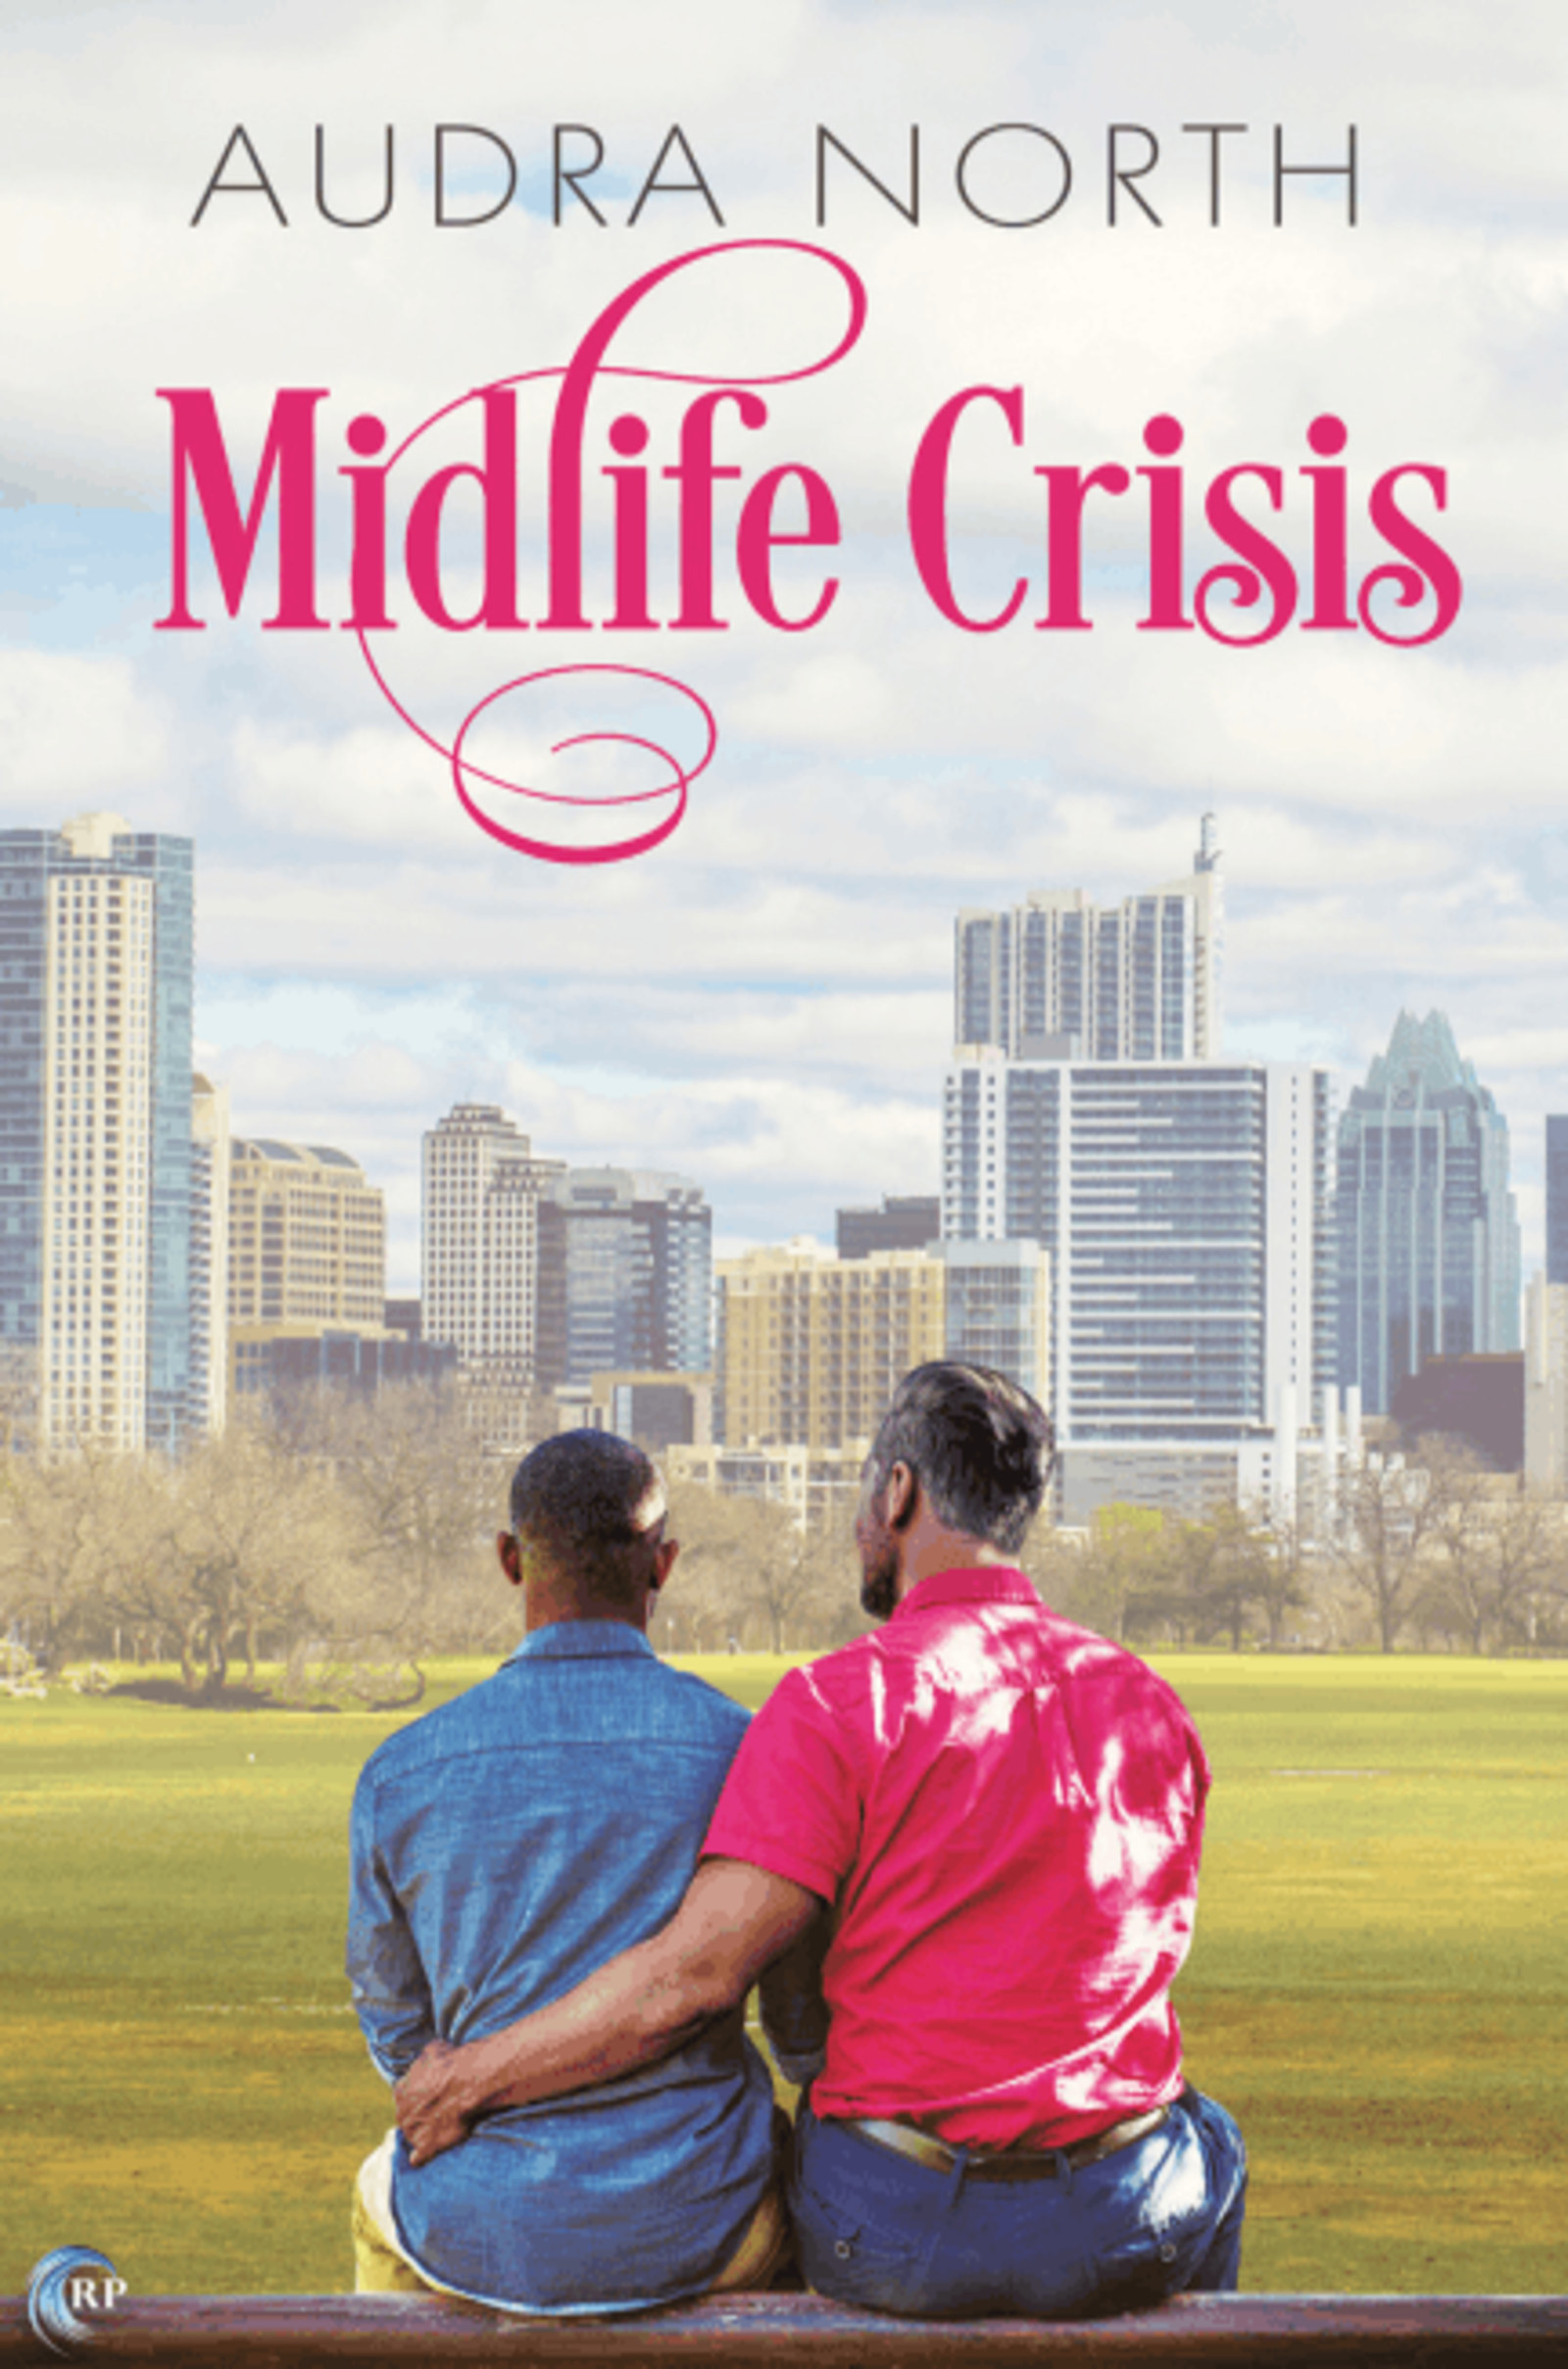 Book Cover of Midlife Crisis by Audra North